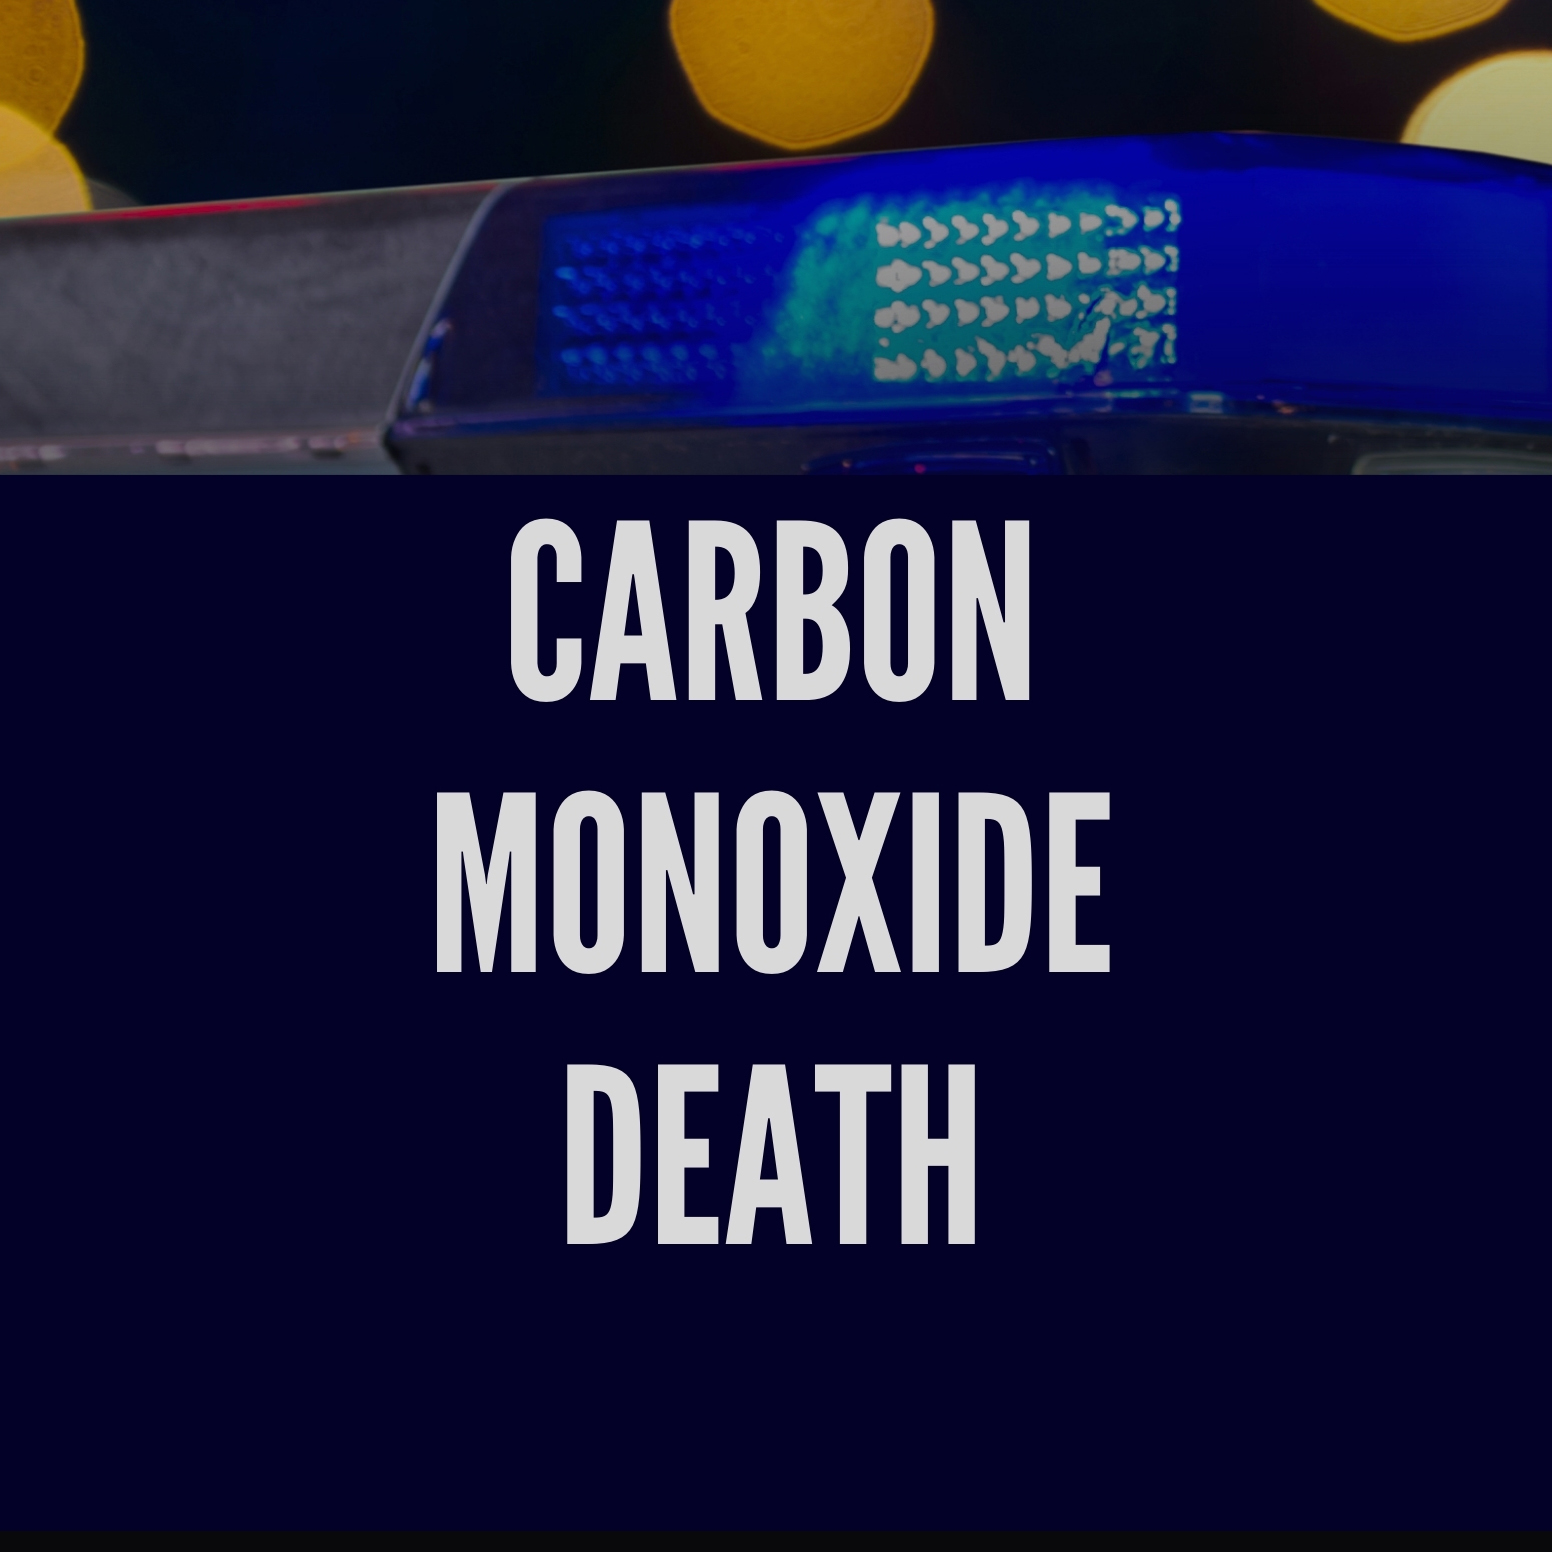 Carbon monoxide incident results in fatality and hospitalizations